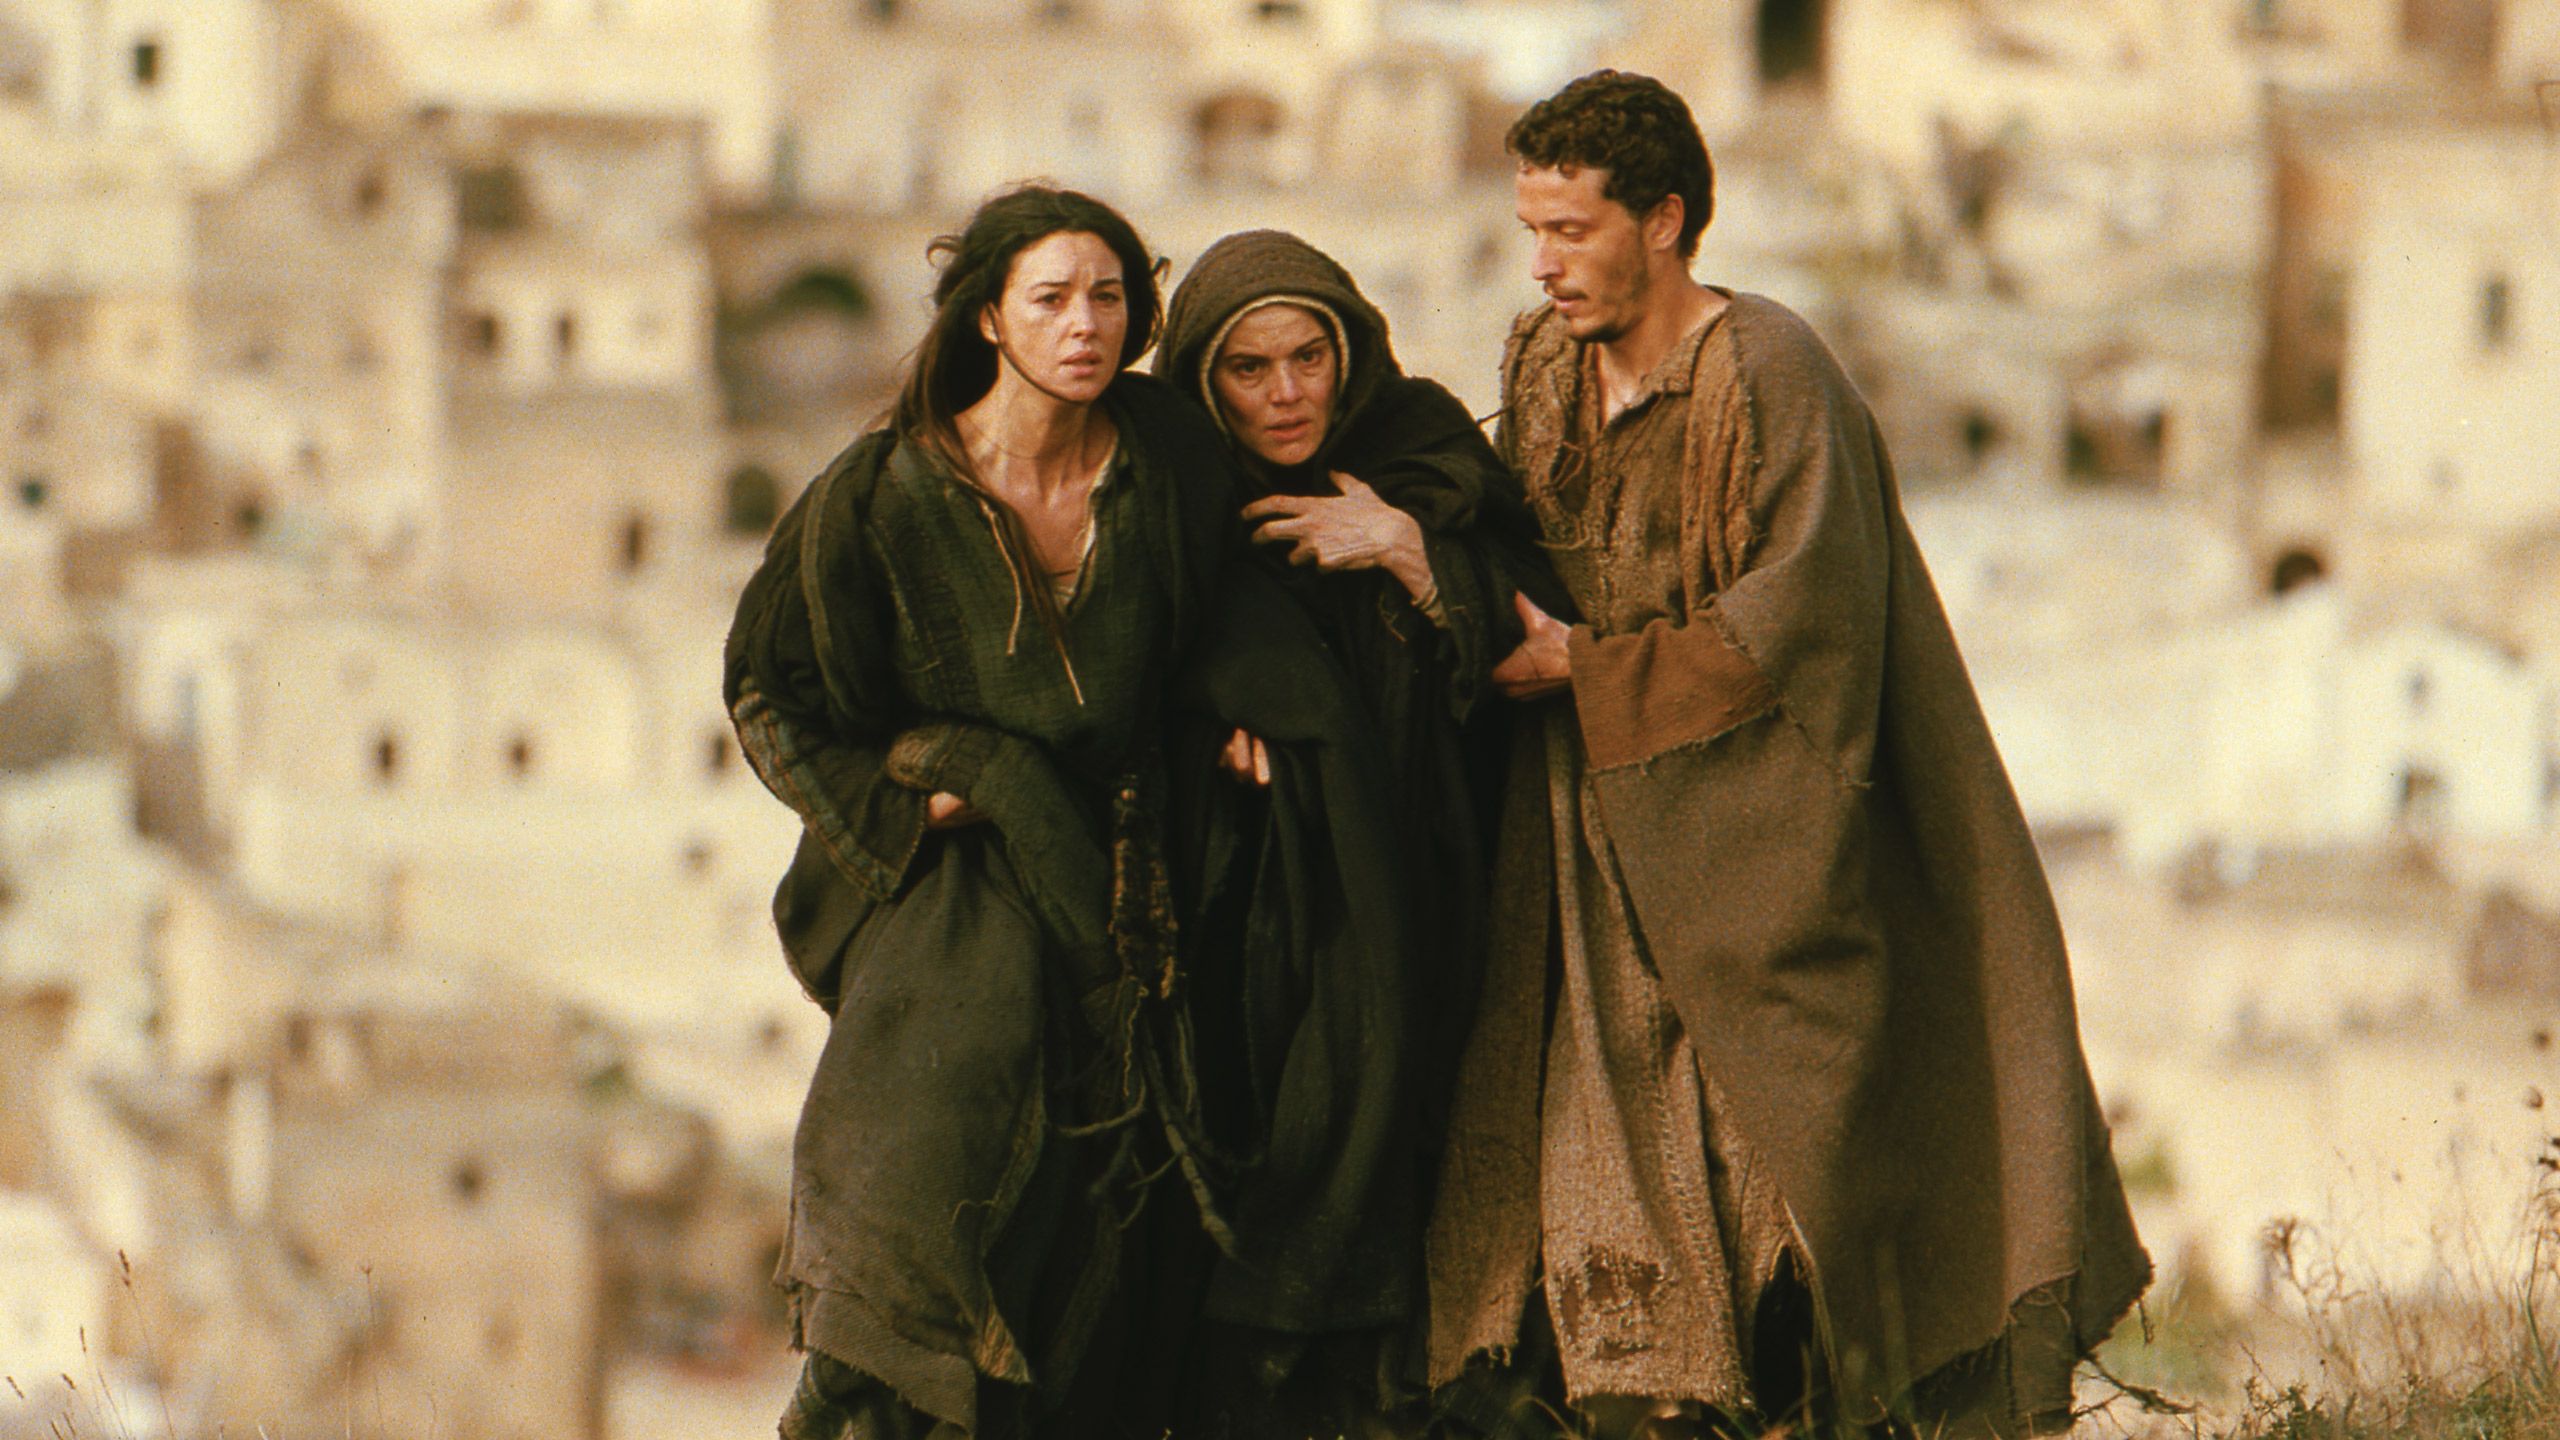 the passion of christ full movie english subtitles